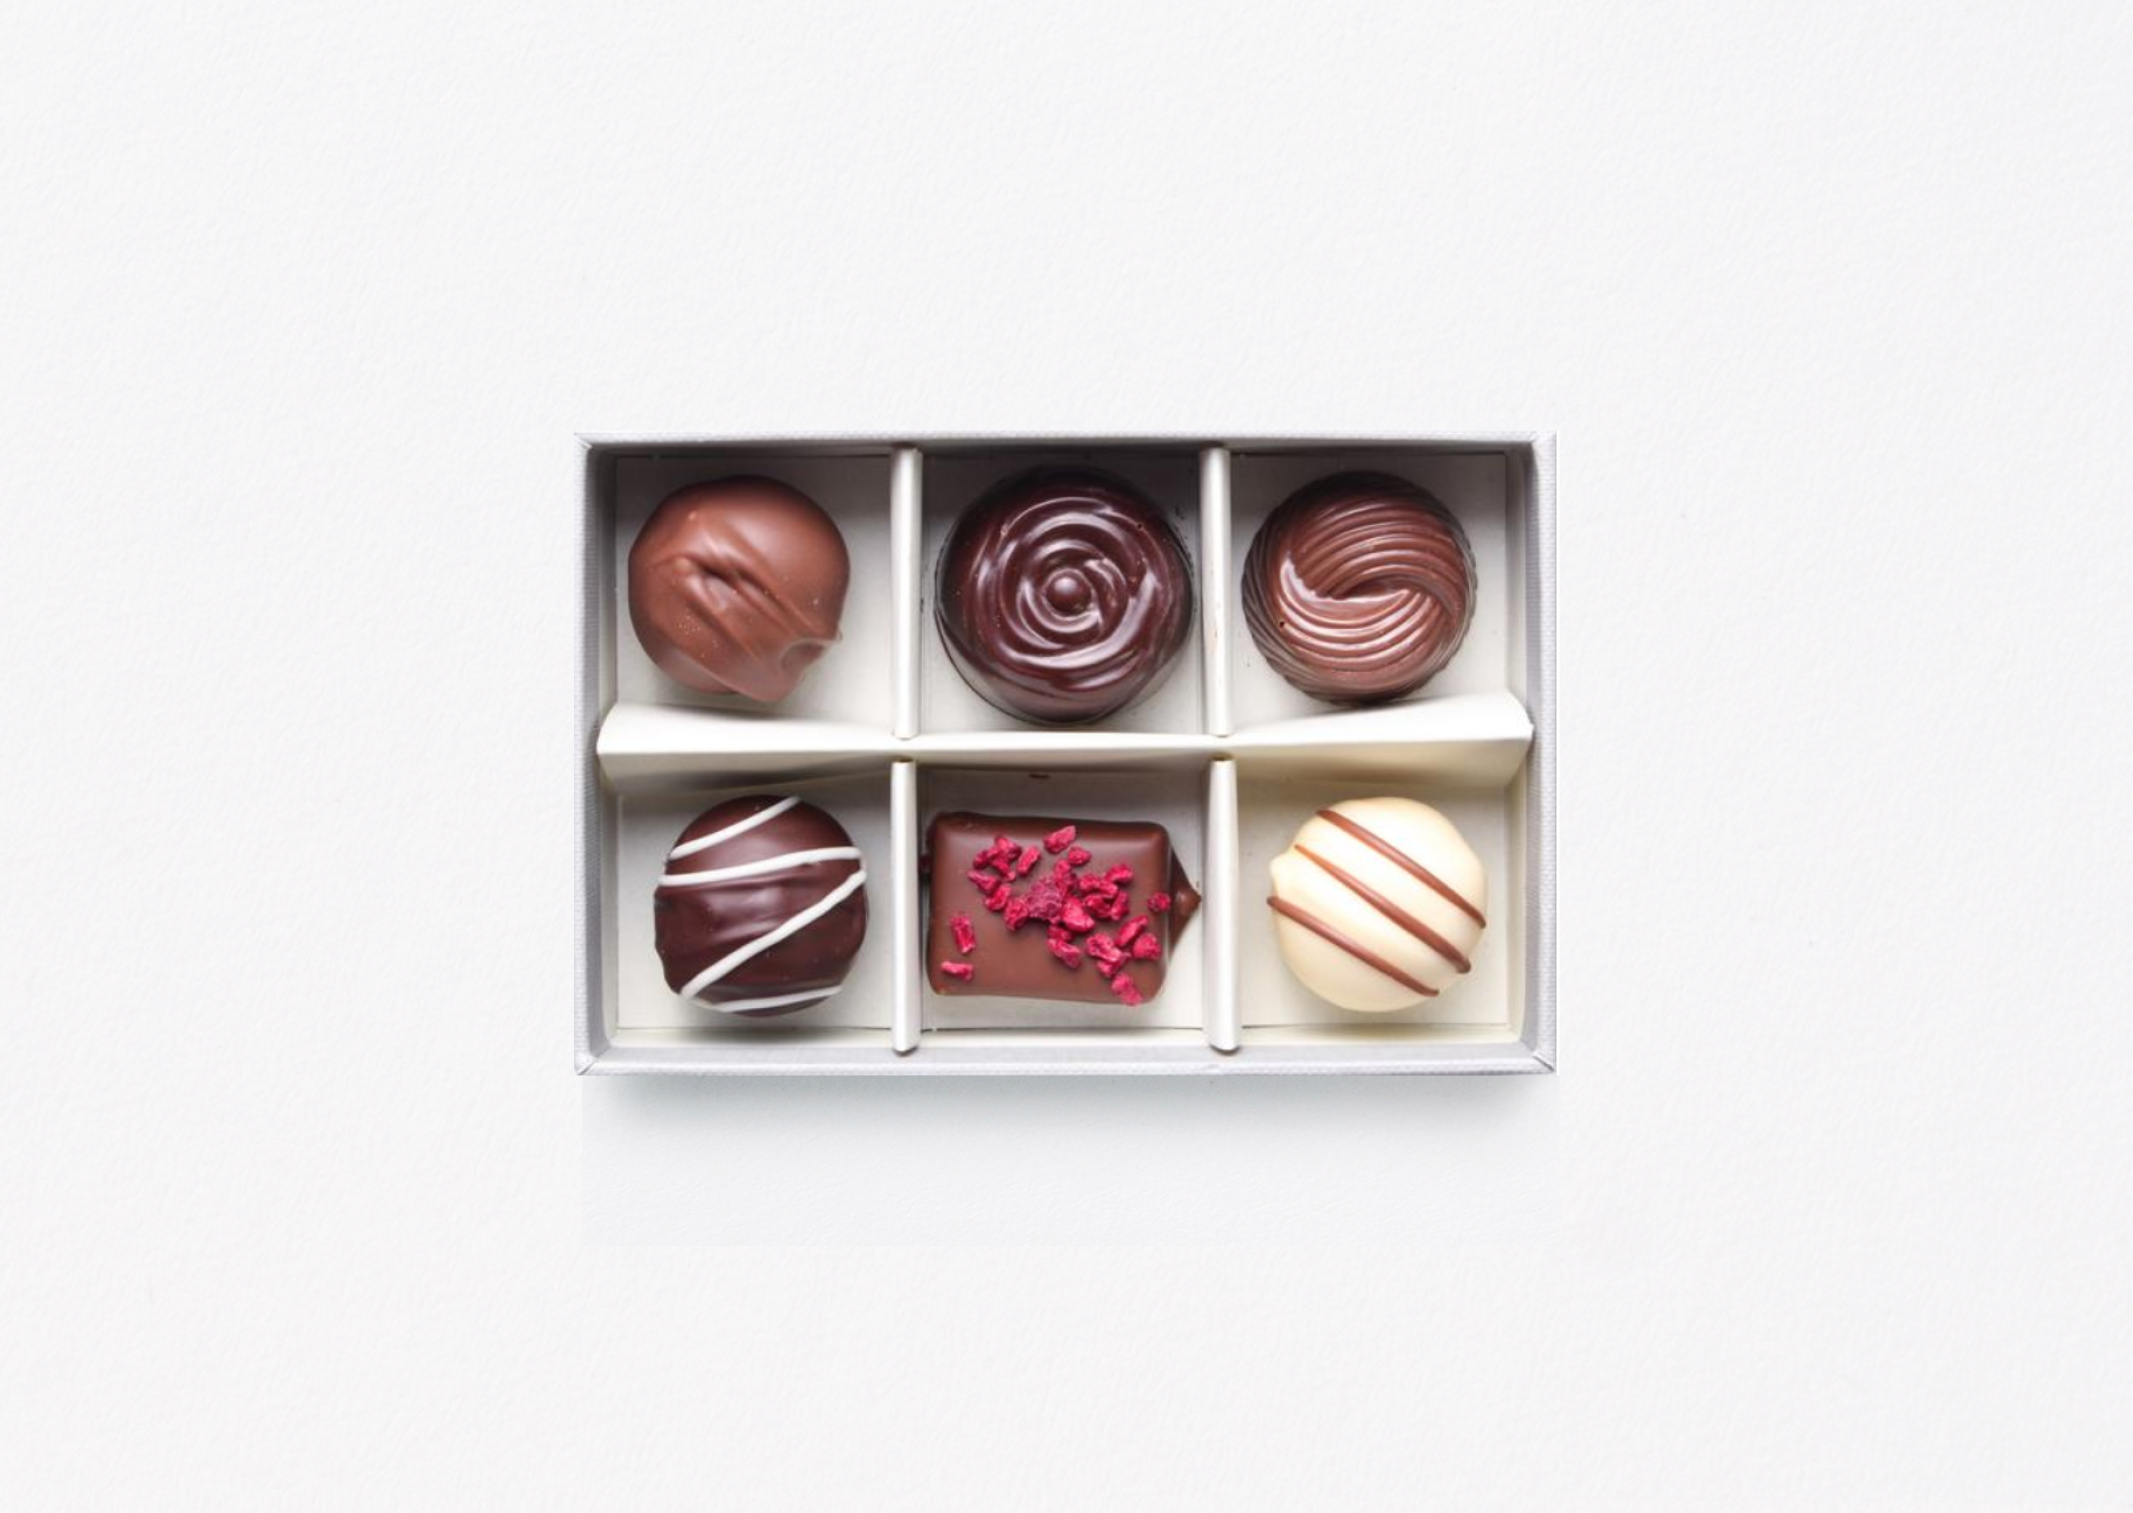 SOAP™ Almost everyone loves chocolate promotional gift – showing handmade chocolate selection